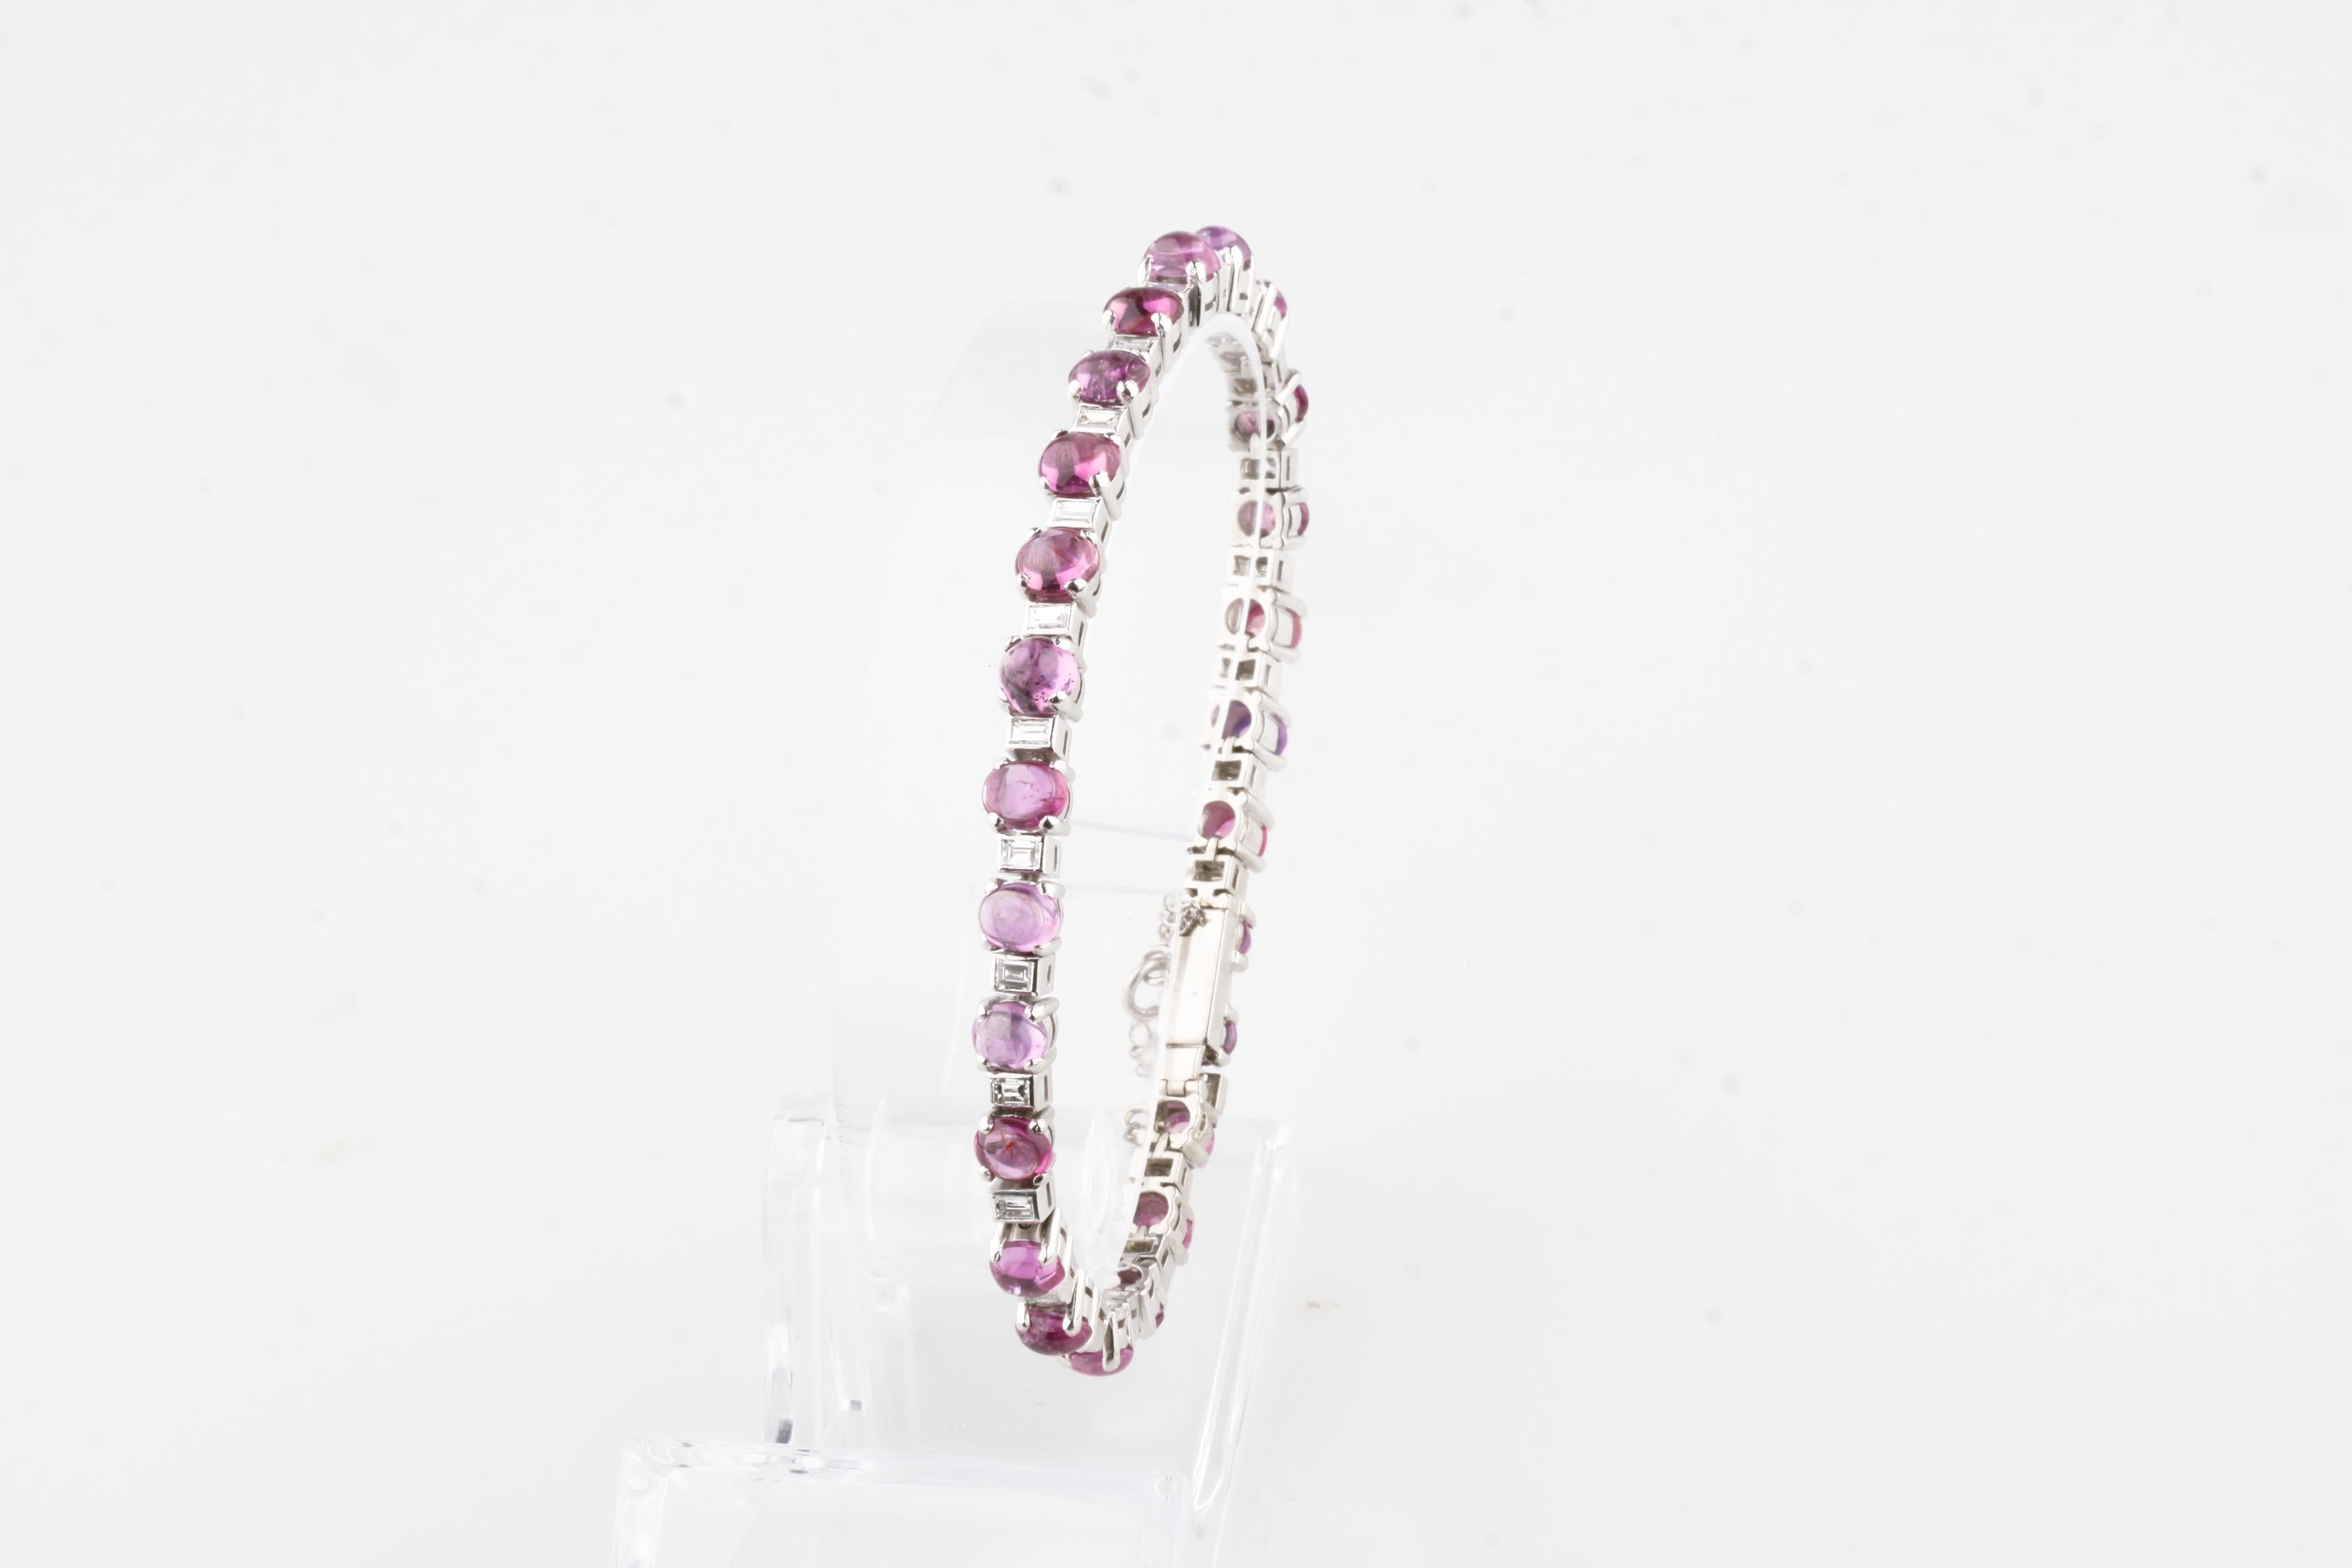 Gorgeous Platinum Bracelet Featuring Alternating Prong-set Ruby Cabochons and Bezel-set Princess Cut Diamonds
Cabochon Rubies have variation in color and shape, but average out to a lovely rose pink.
Includes Hidden Insertion Clasp w/ Safety